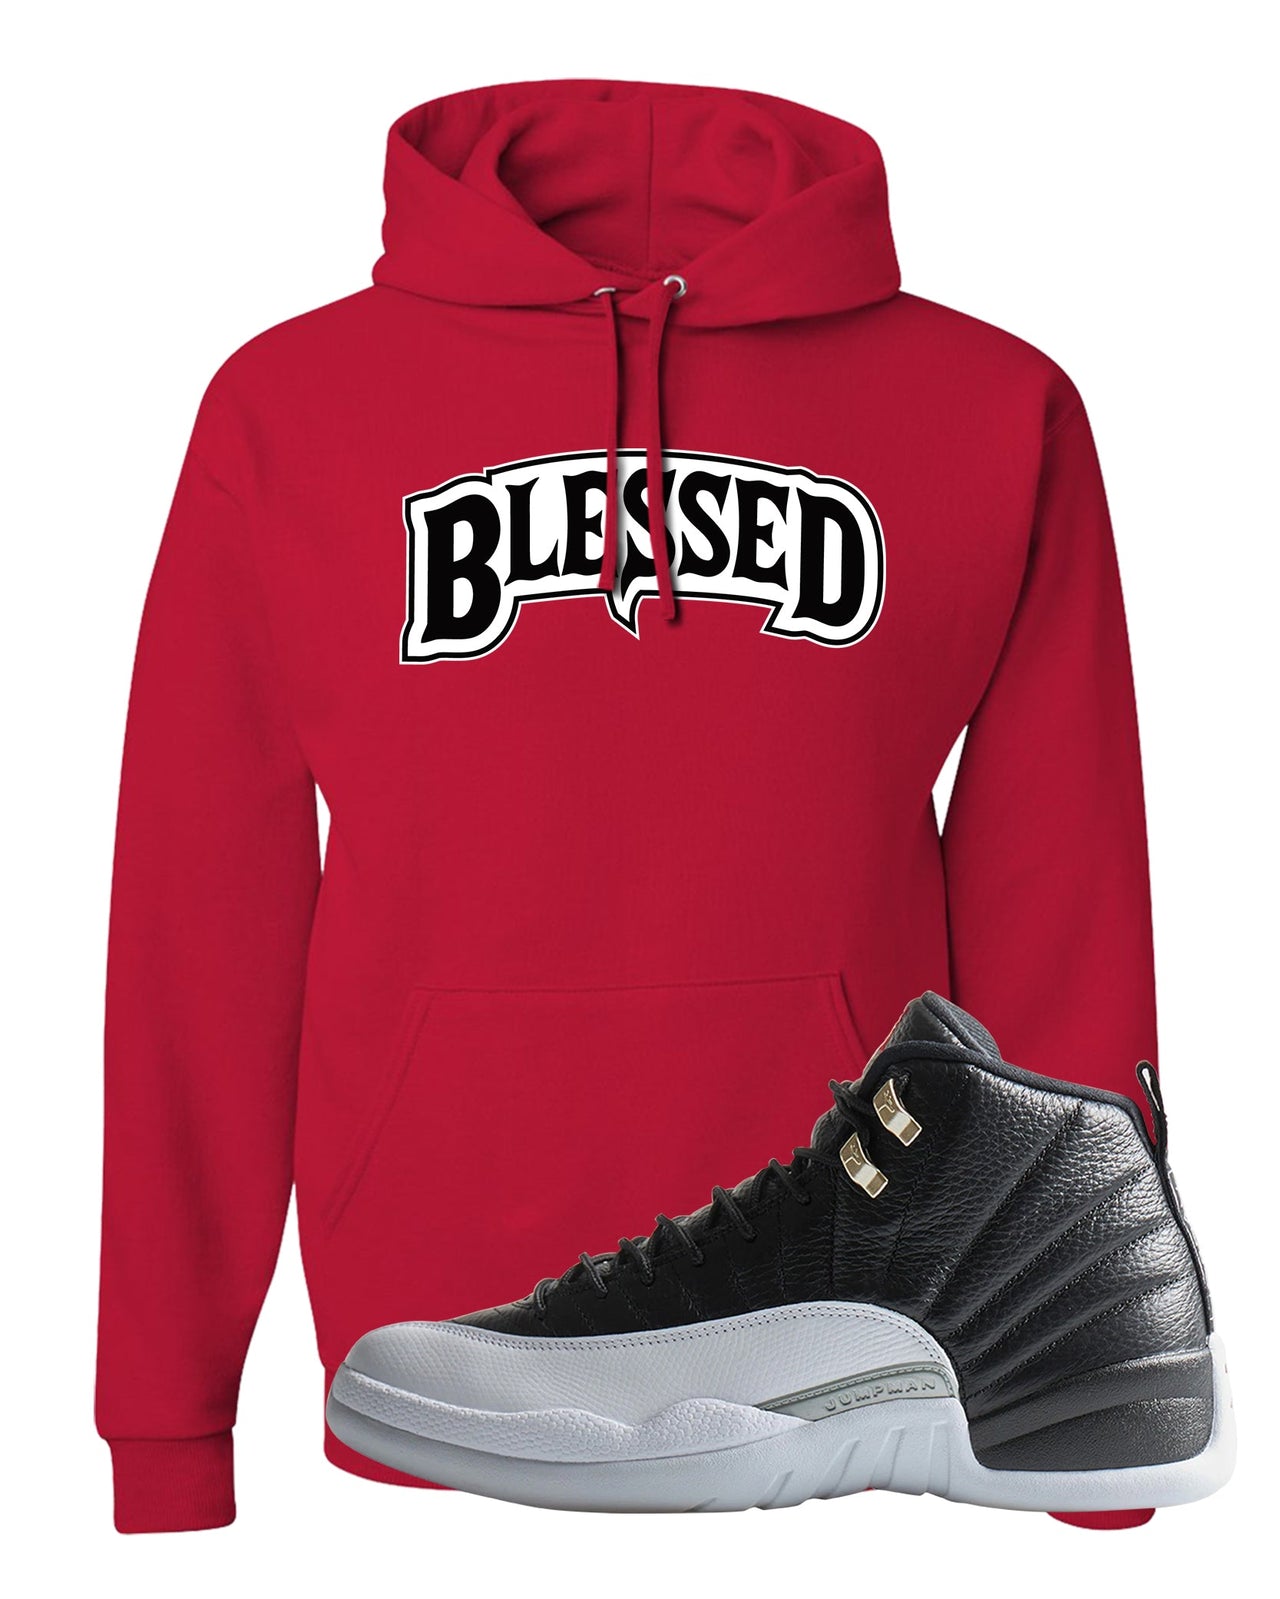 Playoff 12s Hoodie | Blessed Arch, Red